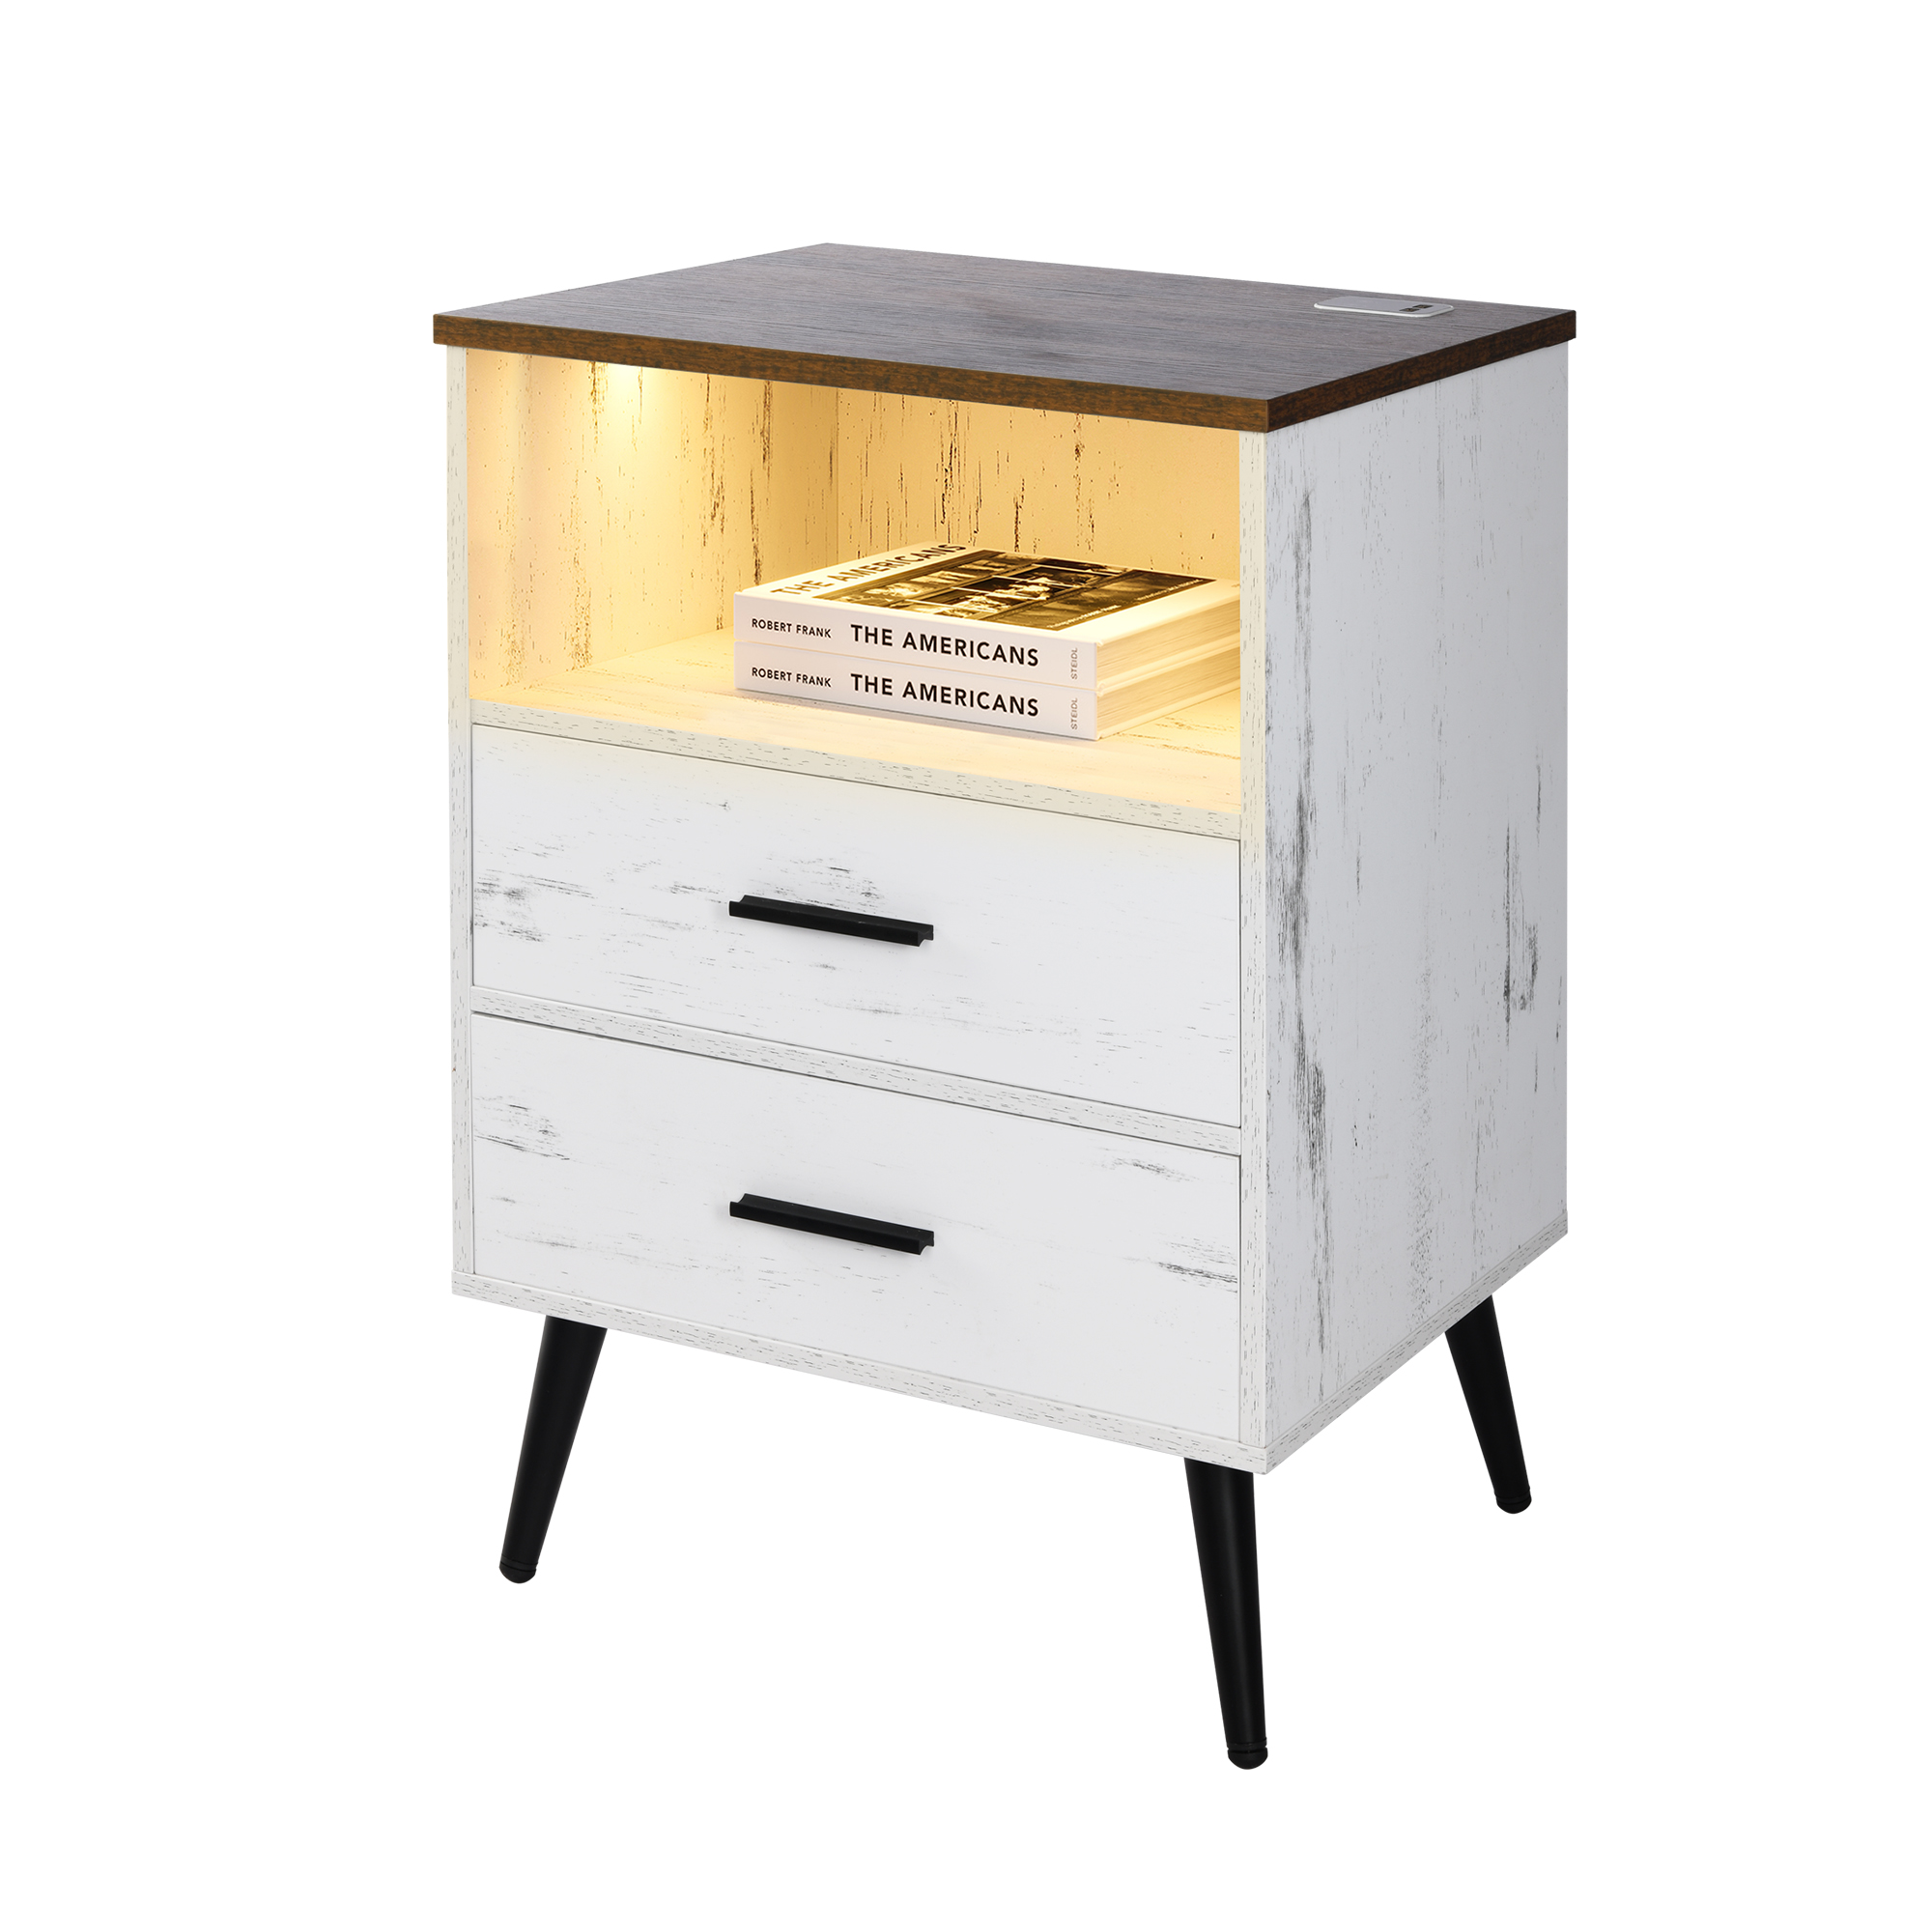 LVSOMT Led Light Nightstands With 2 Large Drawers and Open Shelf and 2 Usb Ports, 15.7"D x 17.7"W x 25.6"H